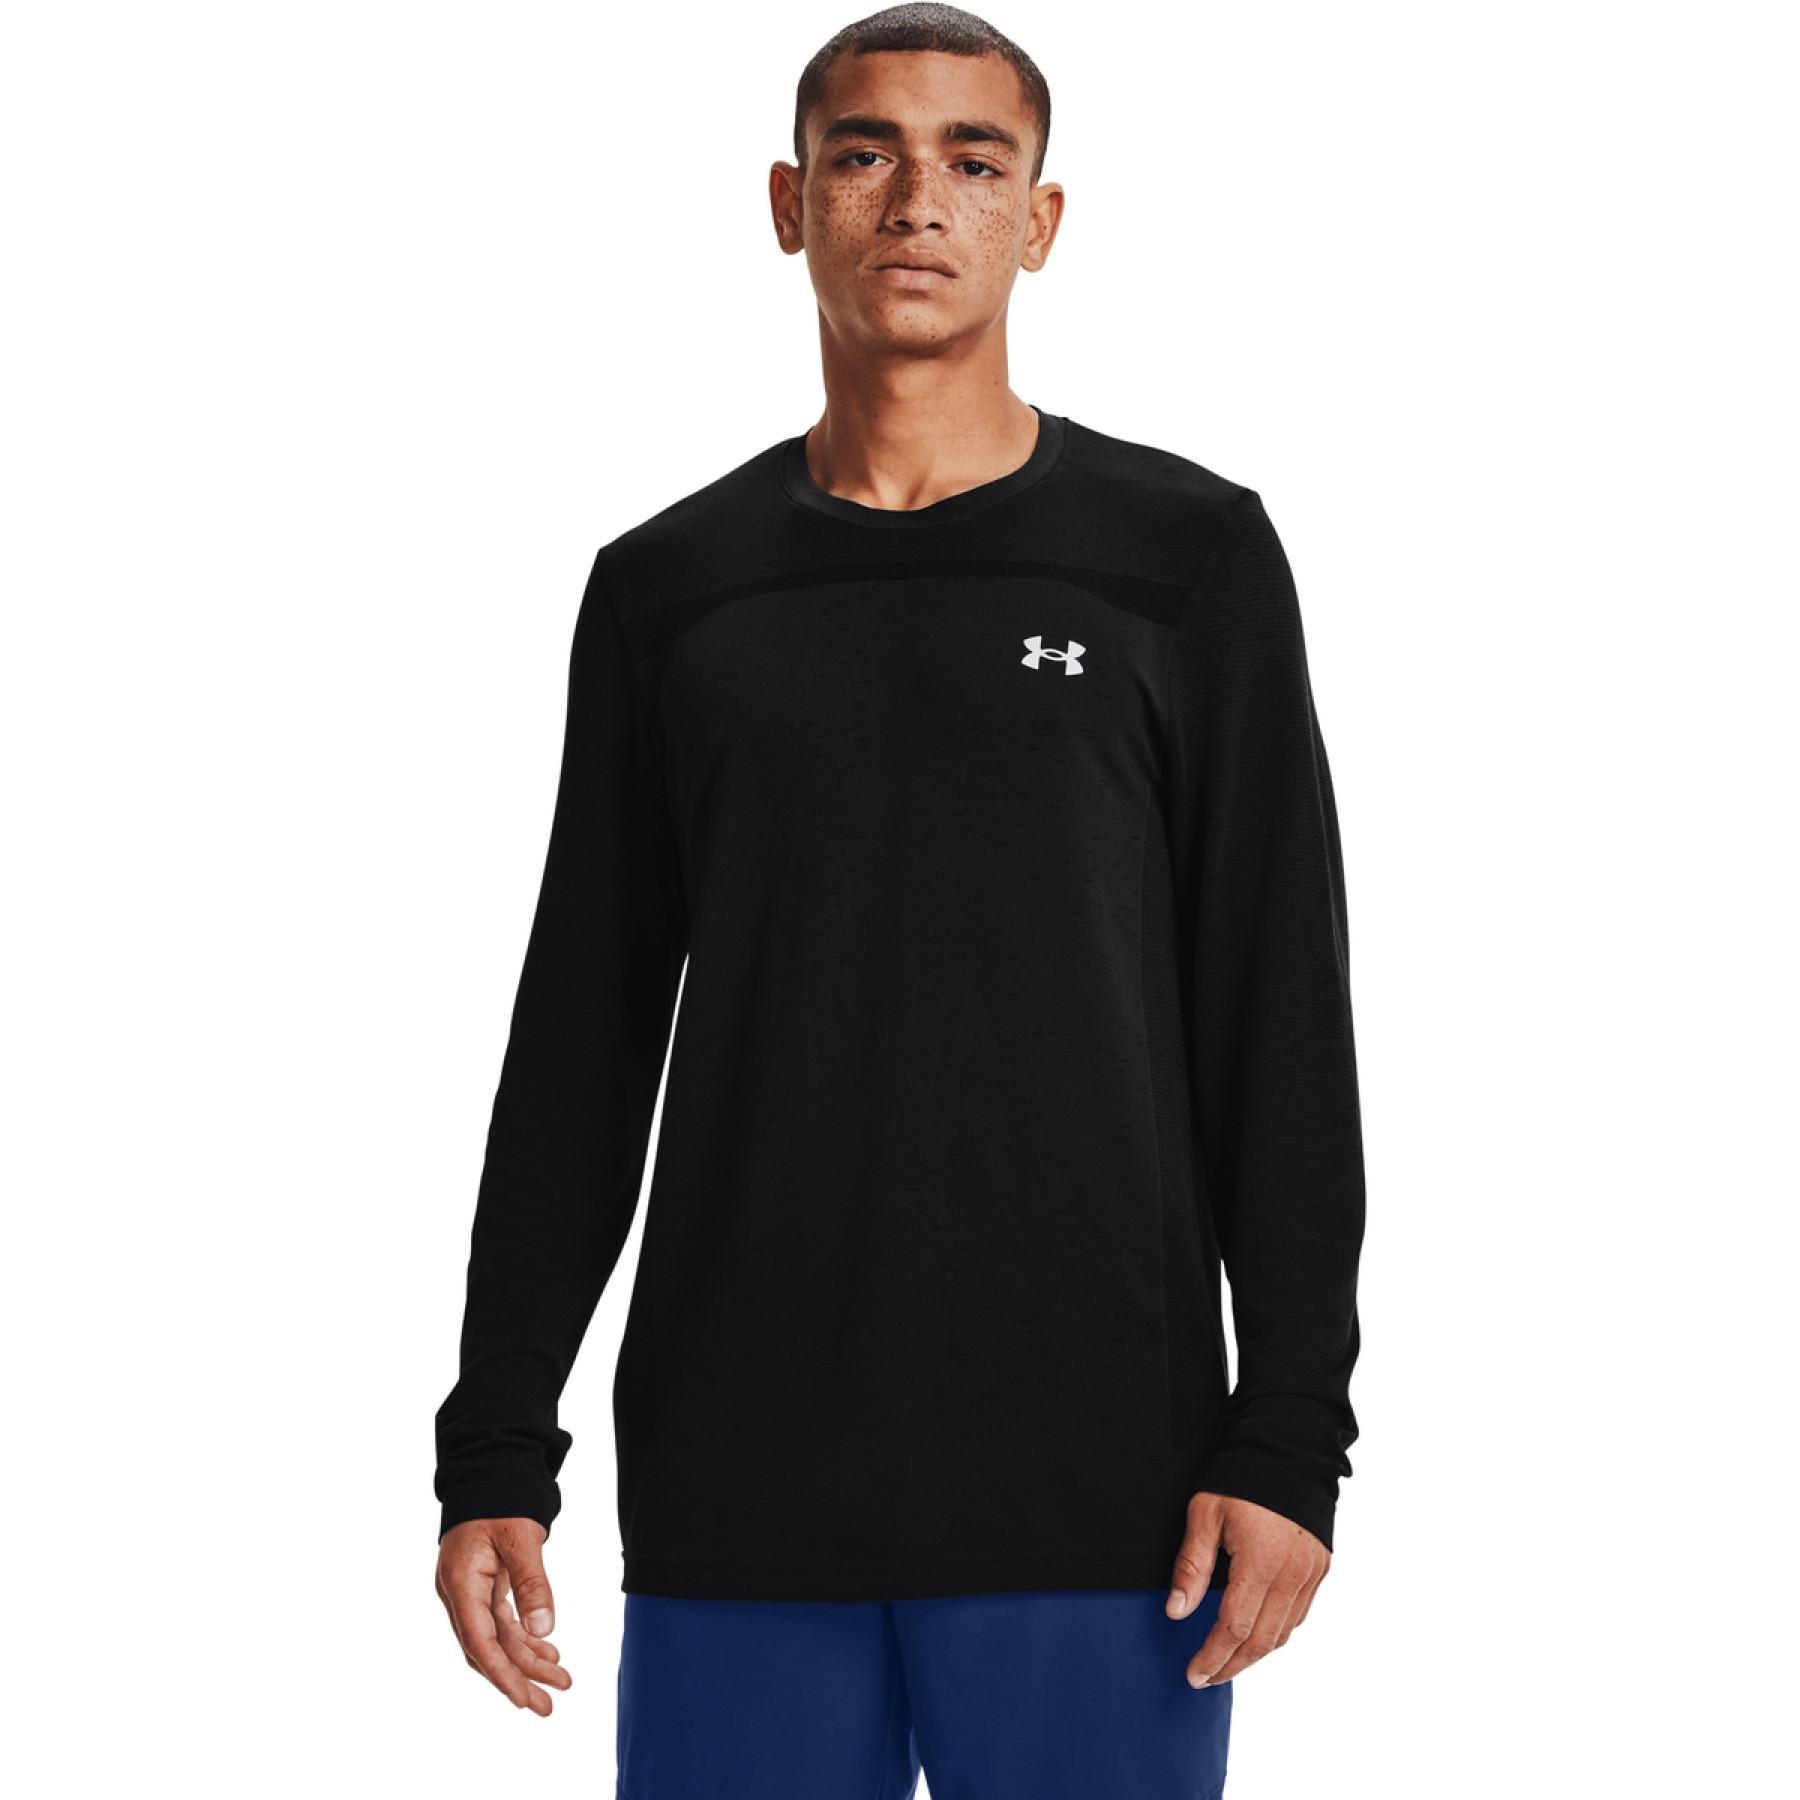 Camiseta Under Armour à manches longues Seamless